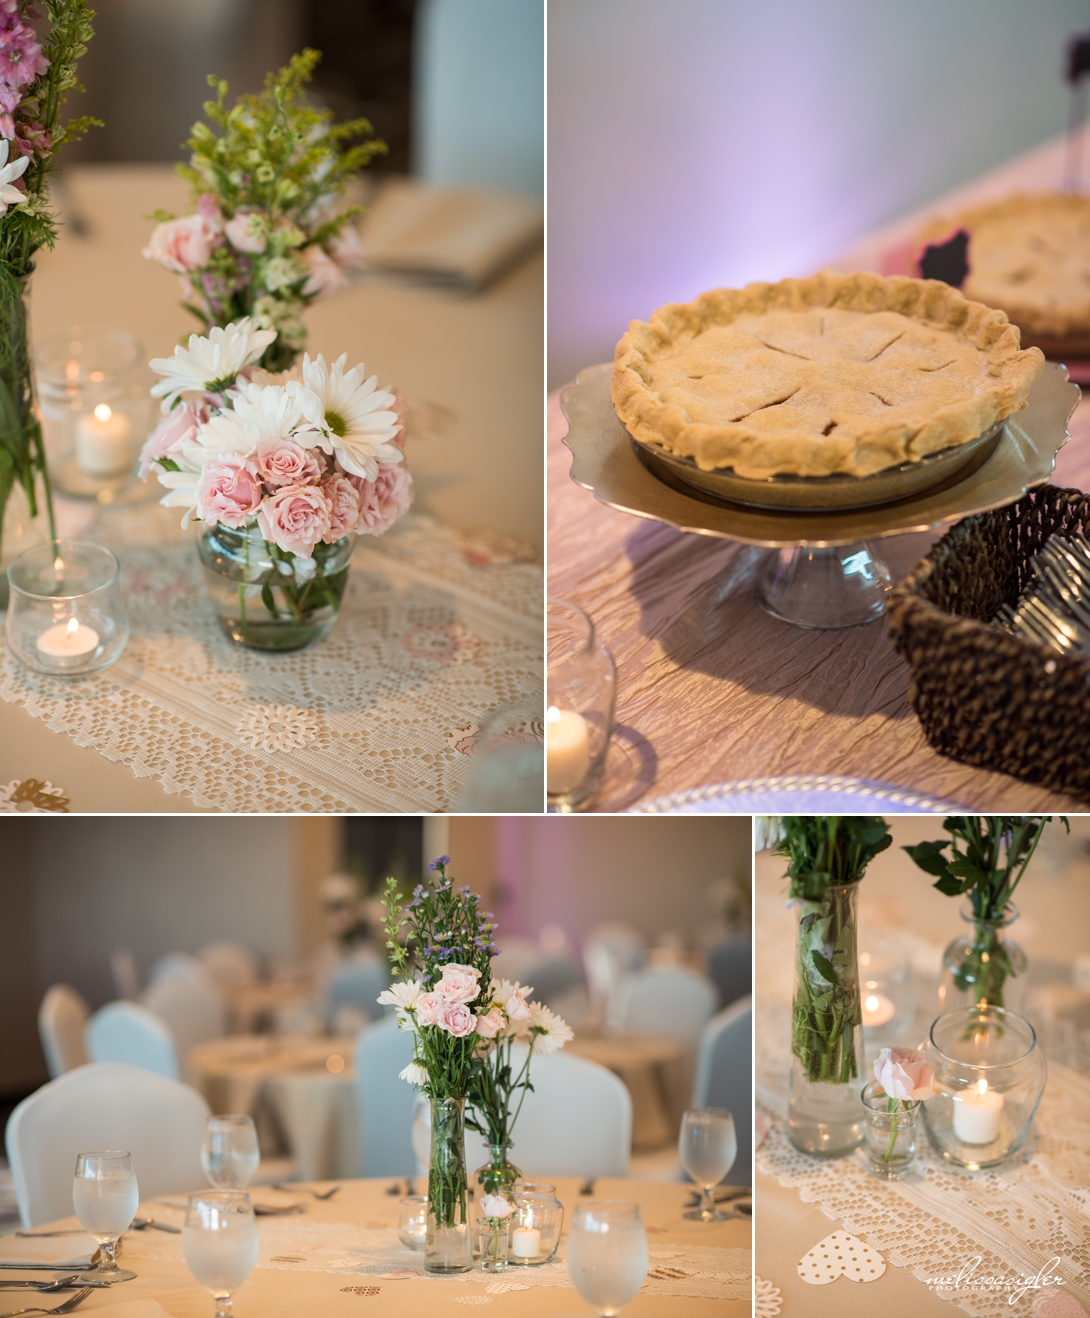 Pink and white reception details